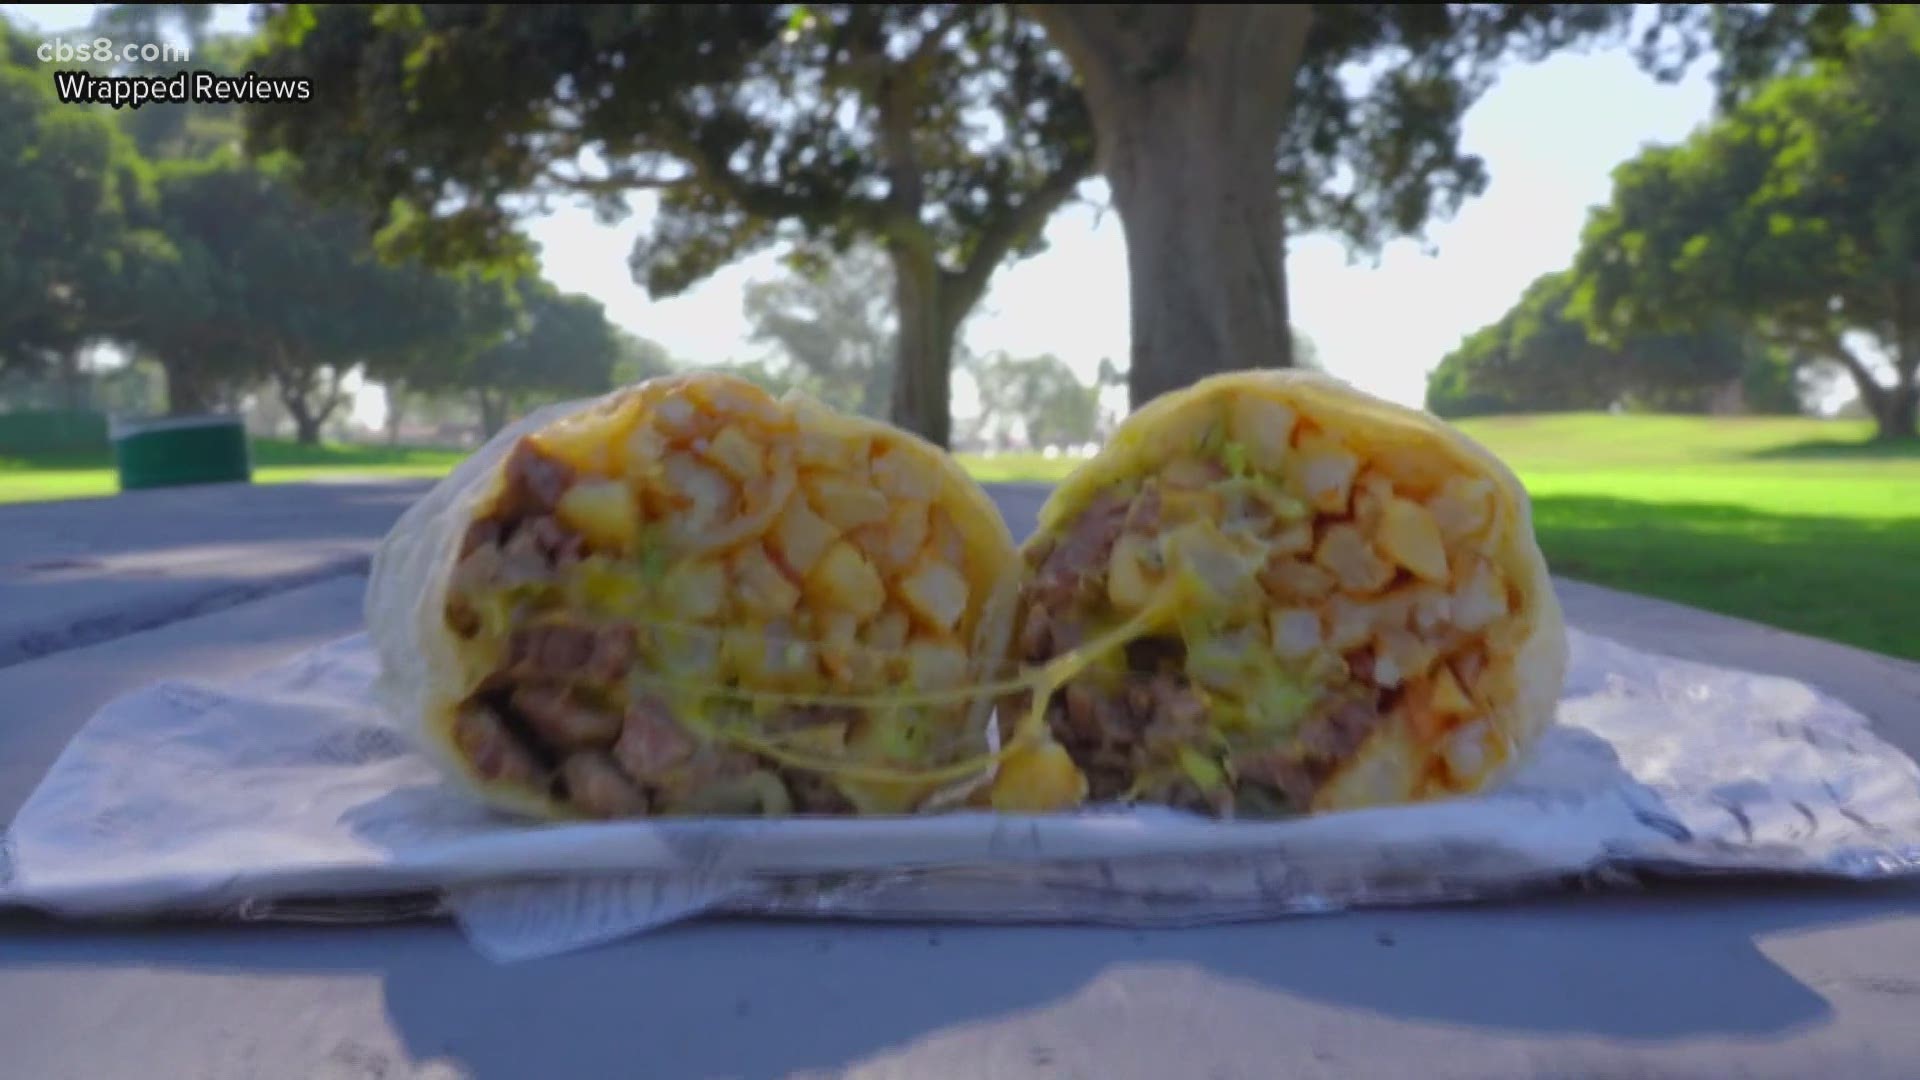 Wrapped Reviews in on the hunt for the best french-fry filled burrito in San Diego County.